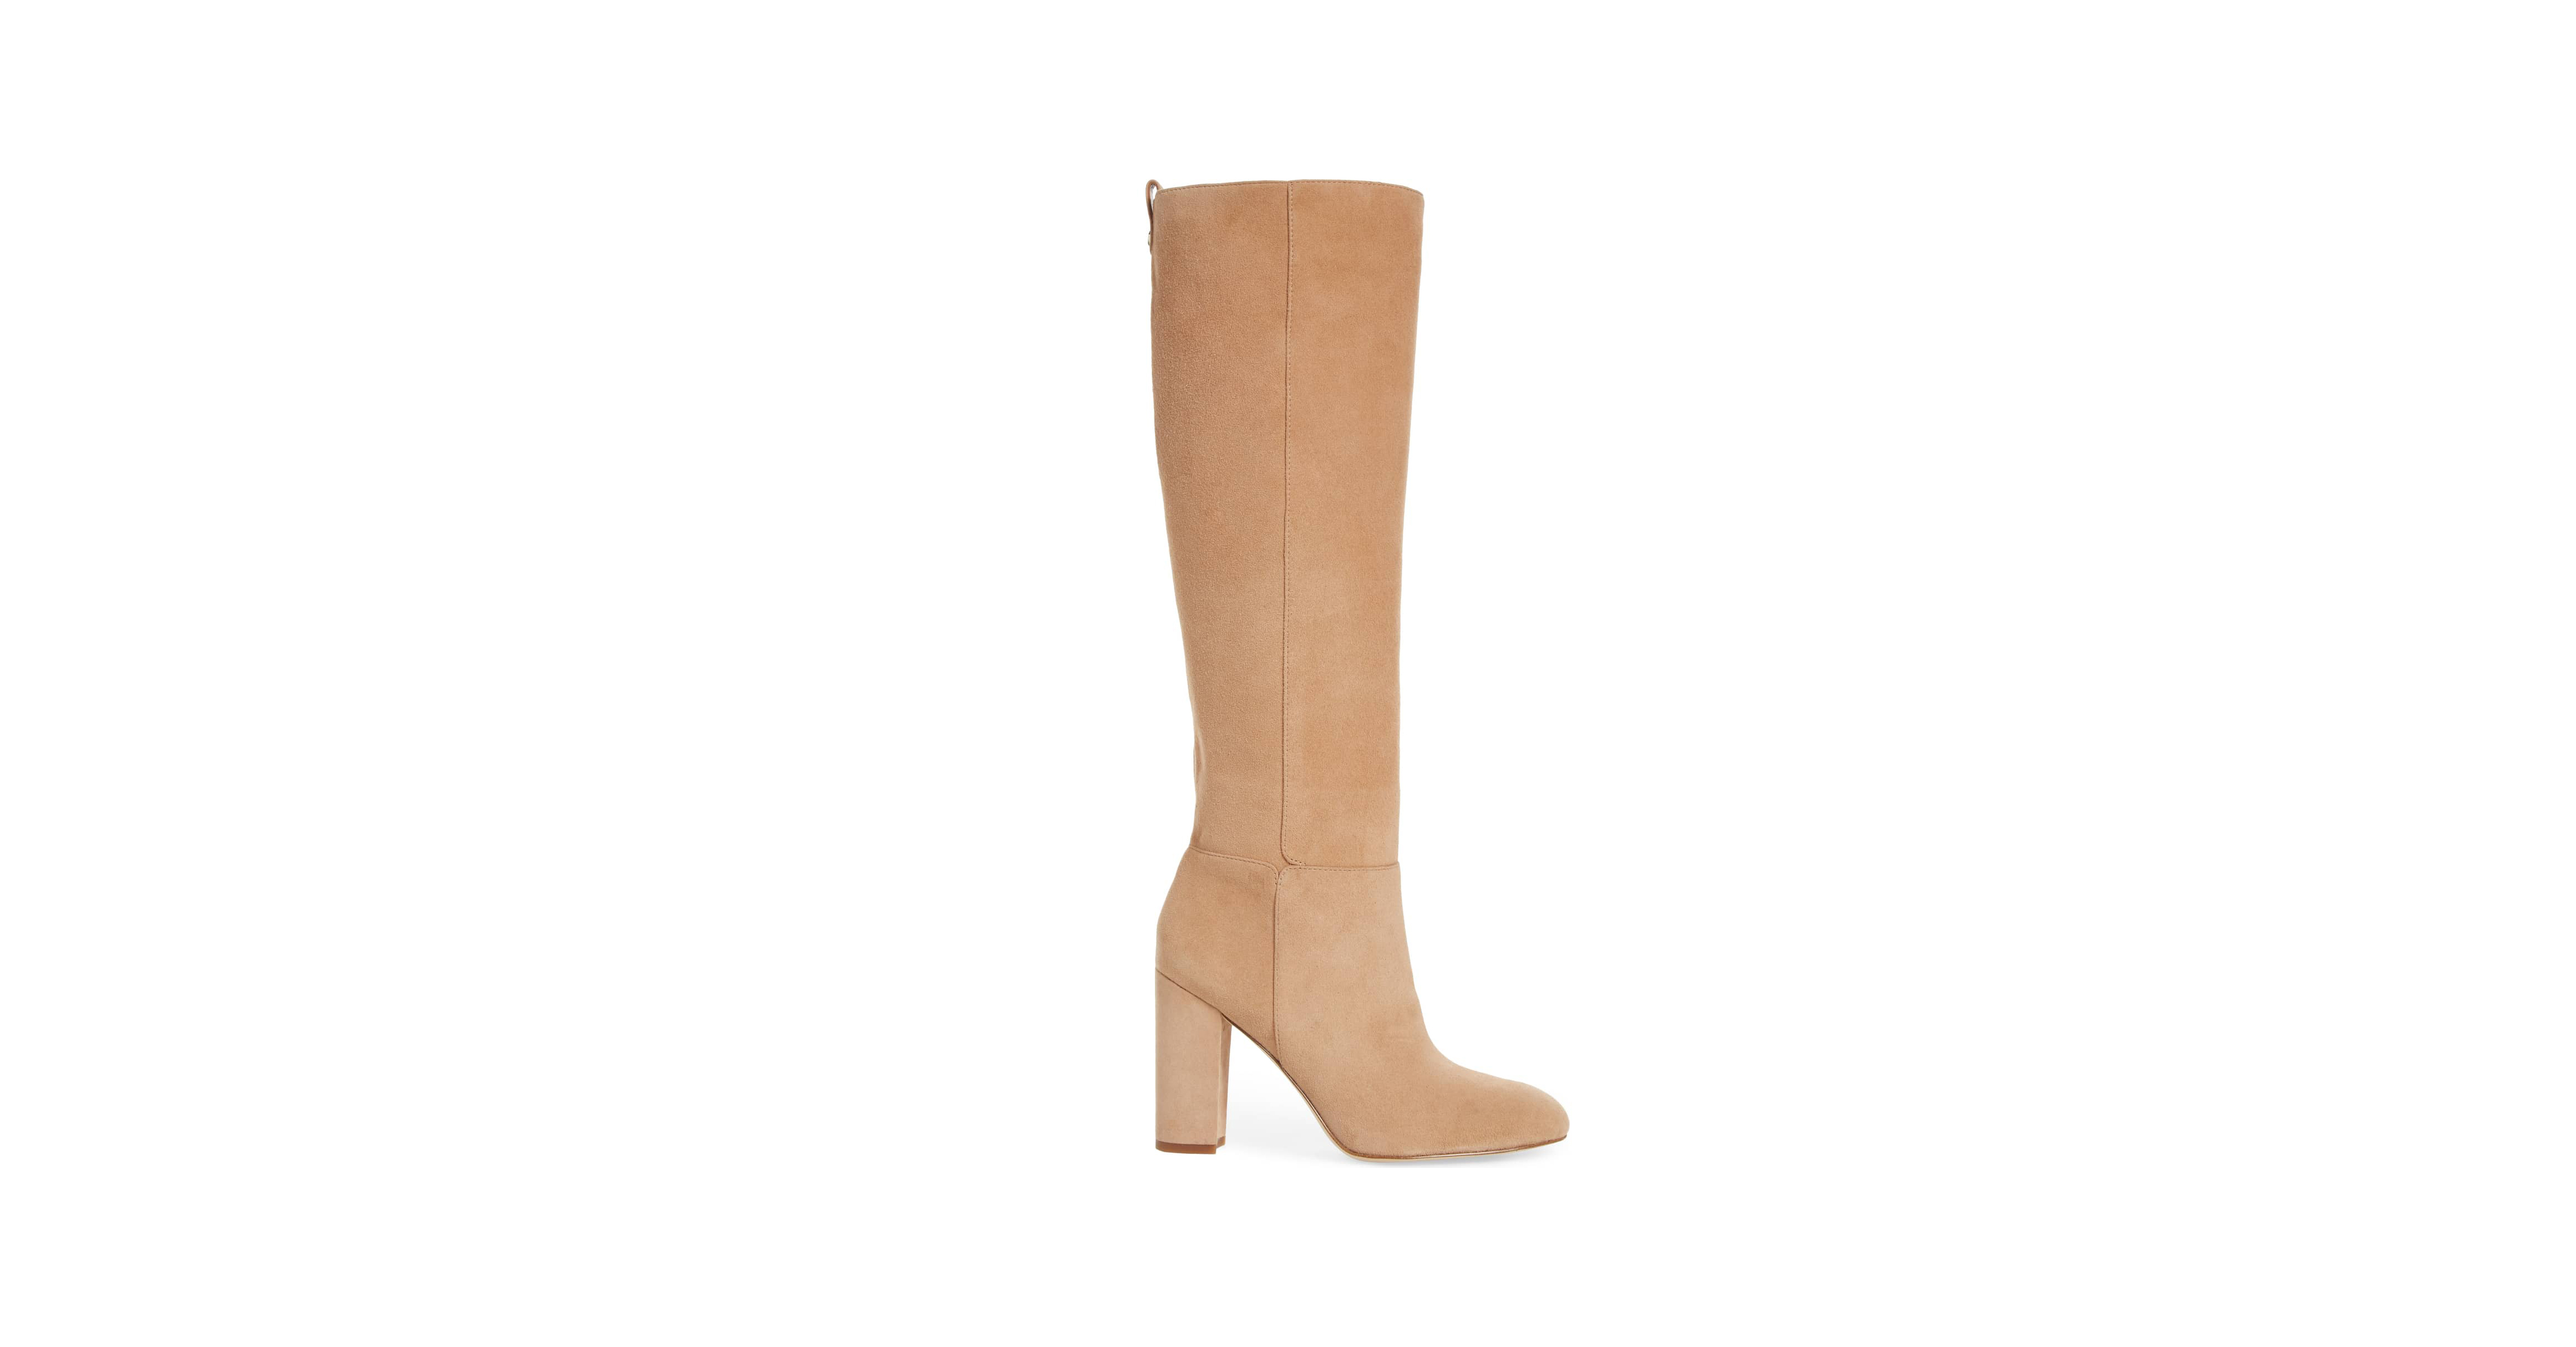 Details about   Sam Edelman Caprice Suede Knee-High Boot Various Sizes Available 